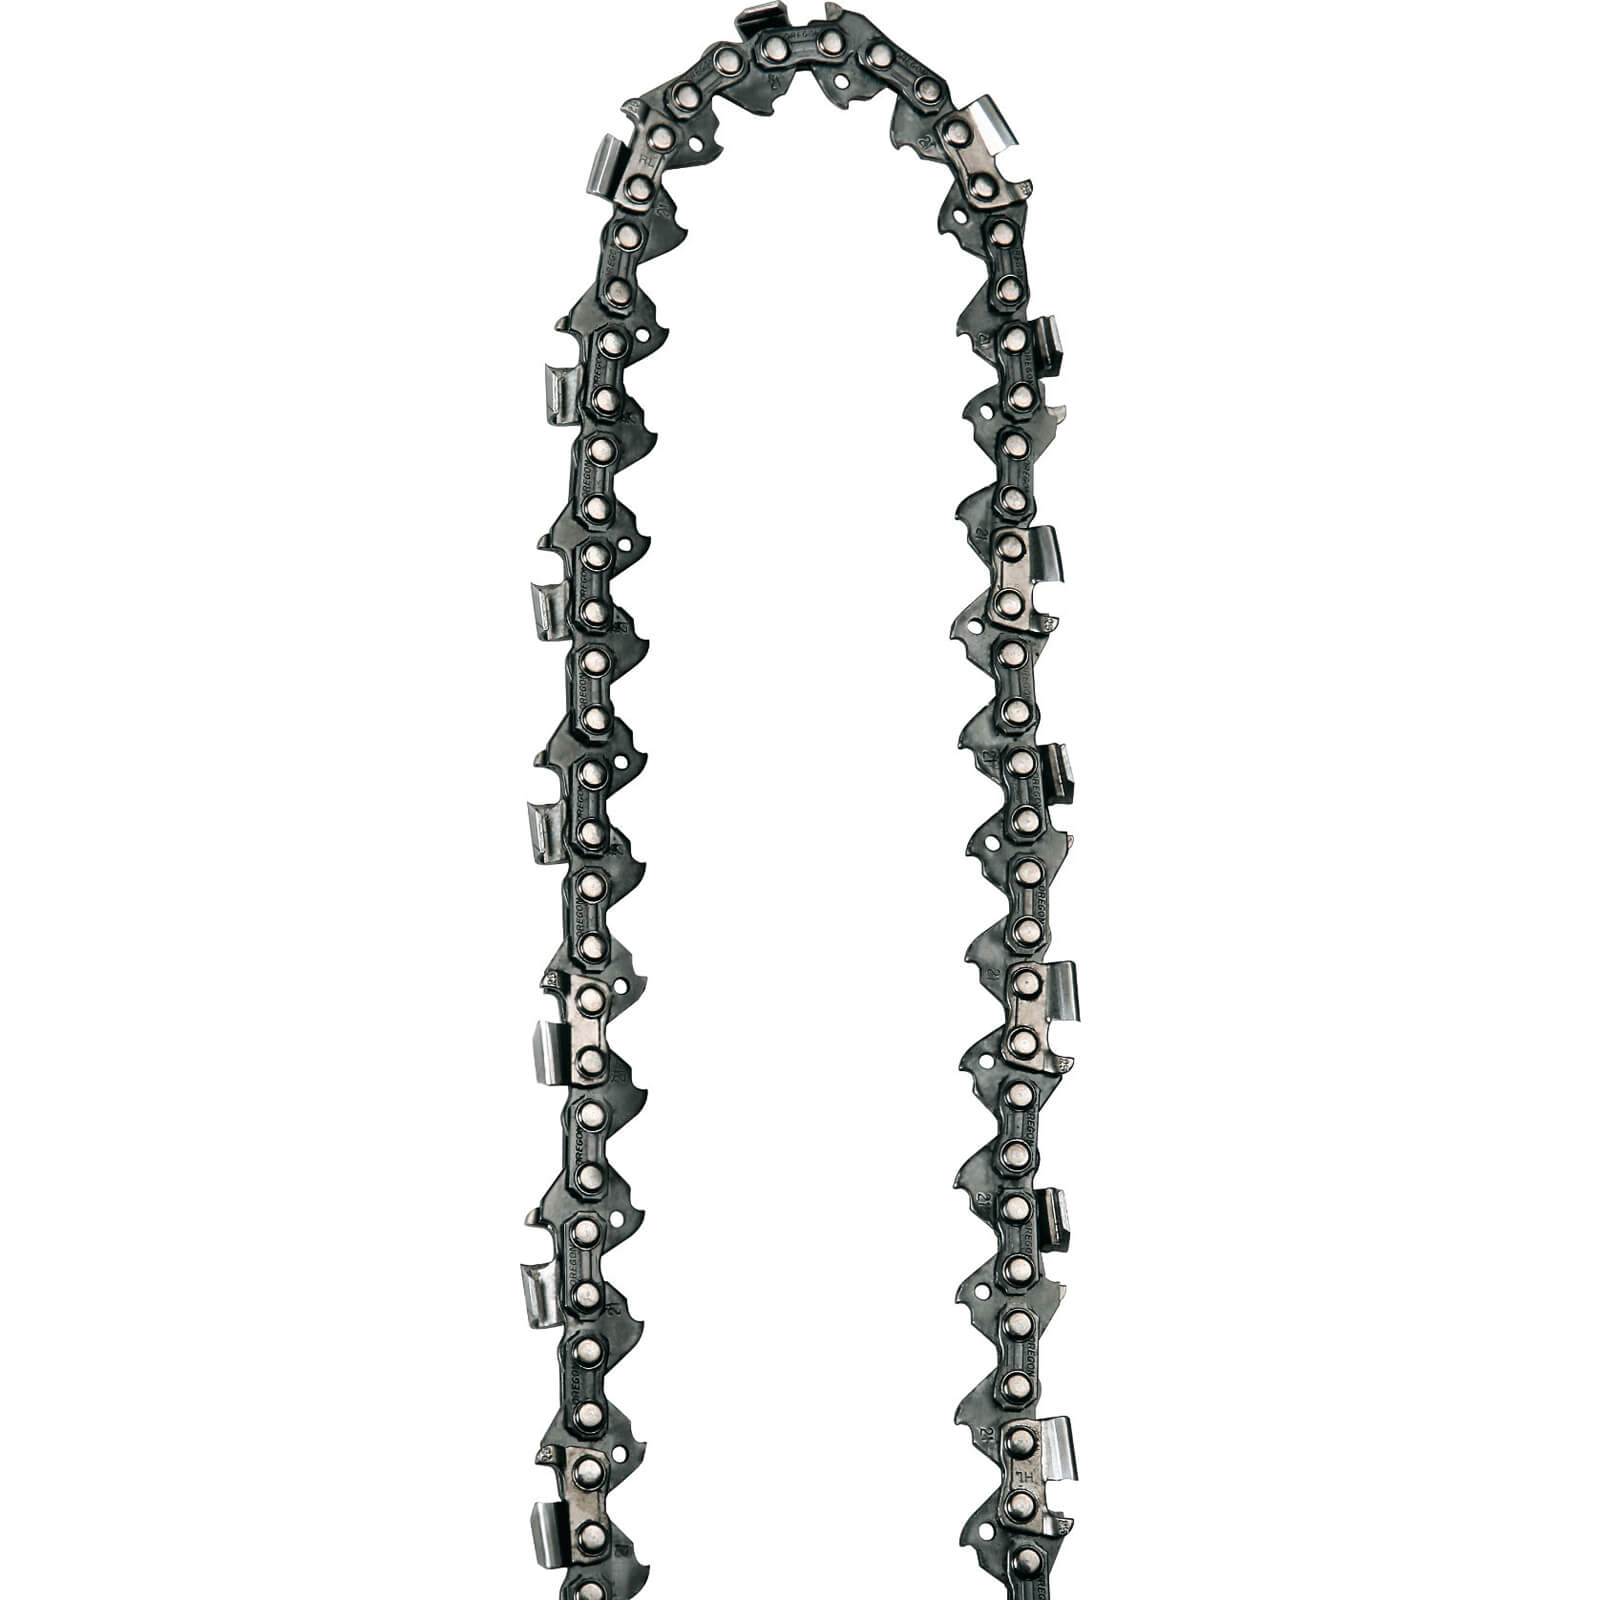 Image of Einhell Genuine Chain for GH-EC 2040 Chainsaws 400mm